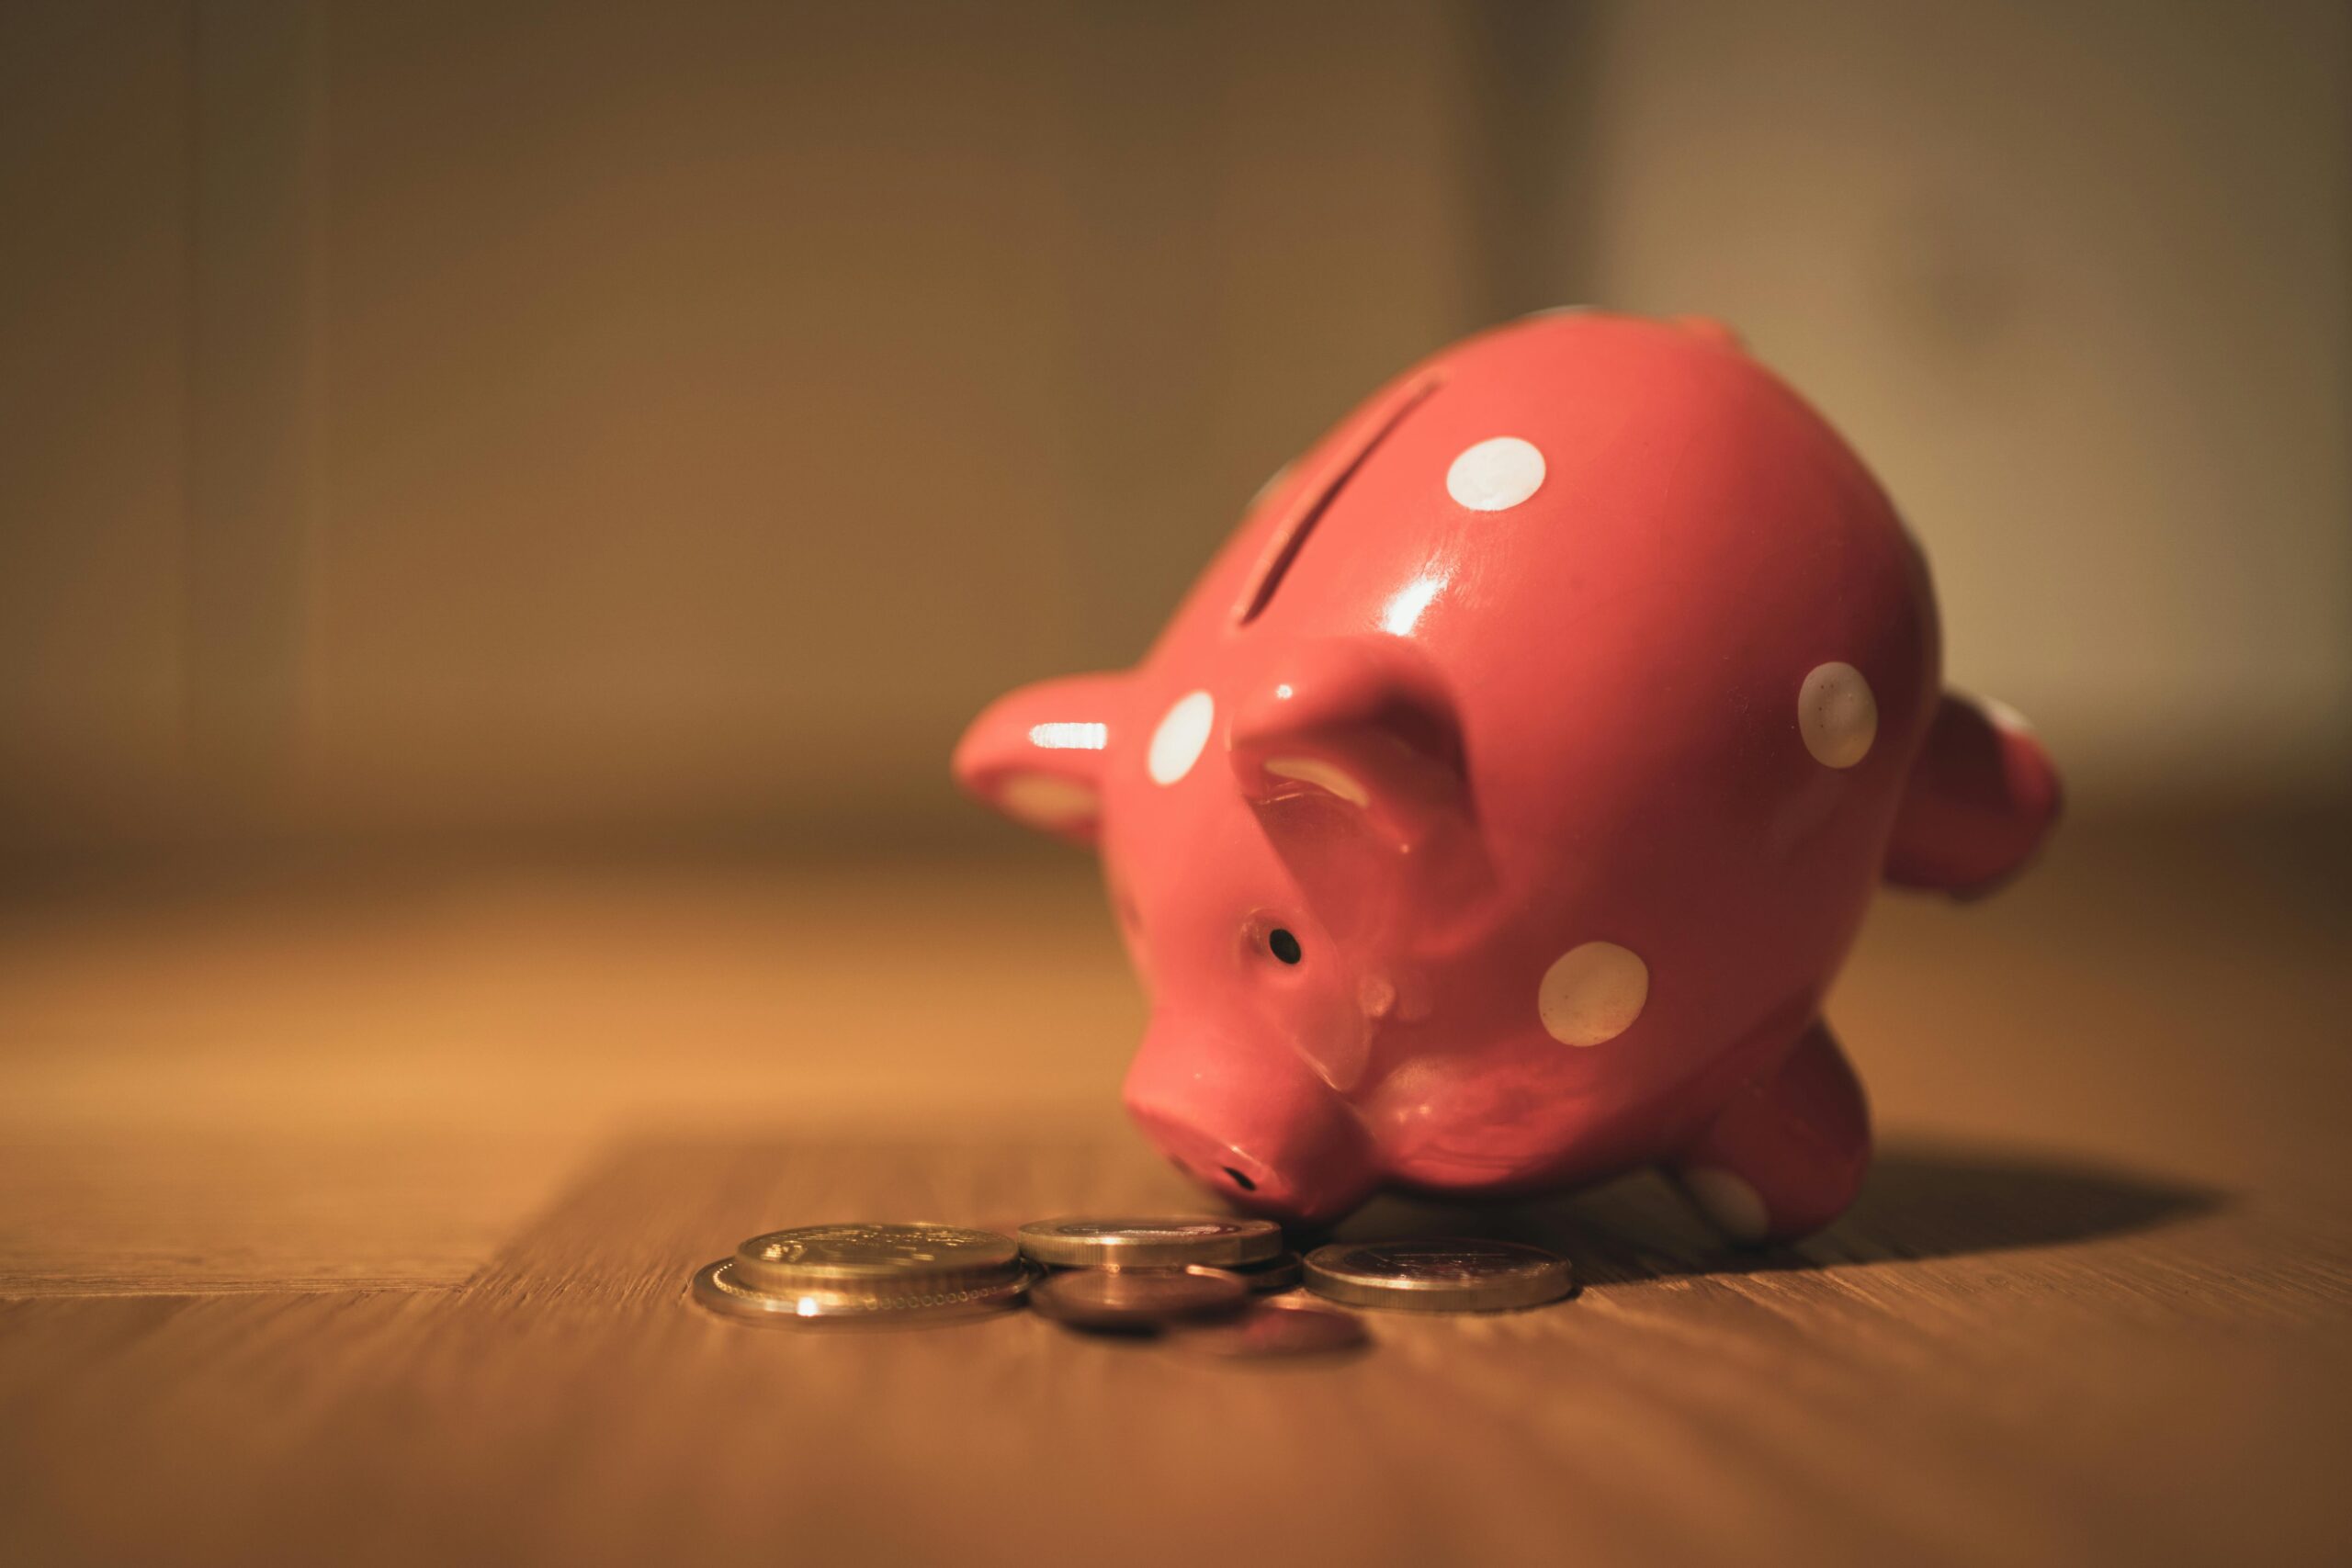 Piggy bank with coins spilling around representing a wealthy spouse's attempt to hide assets at time of separation